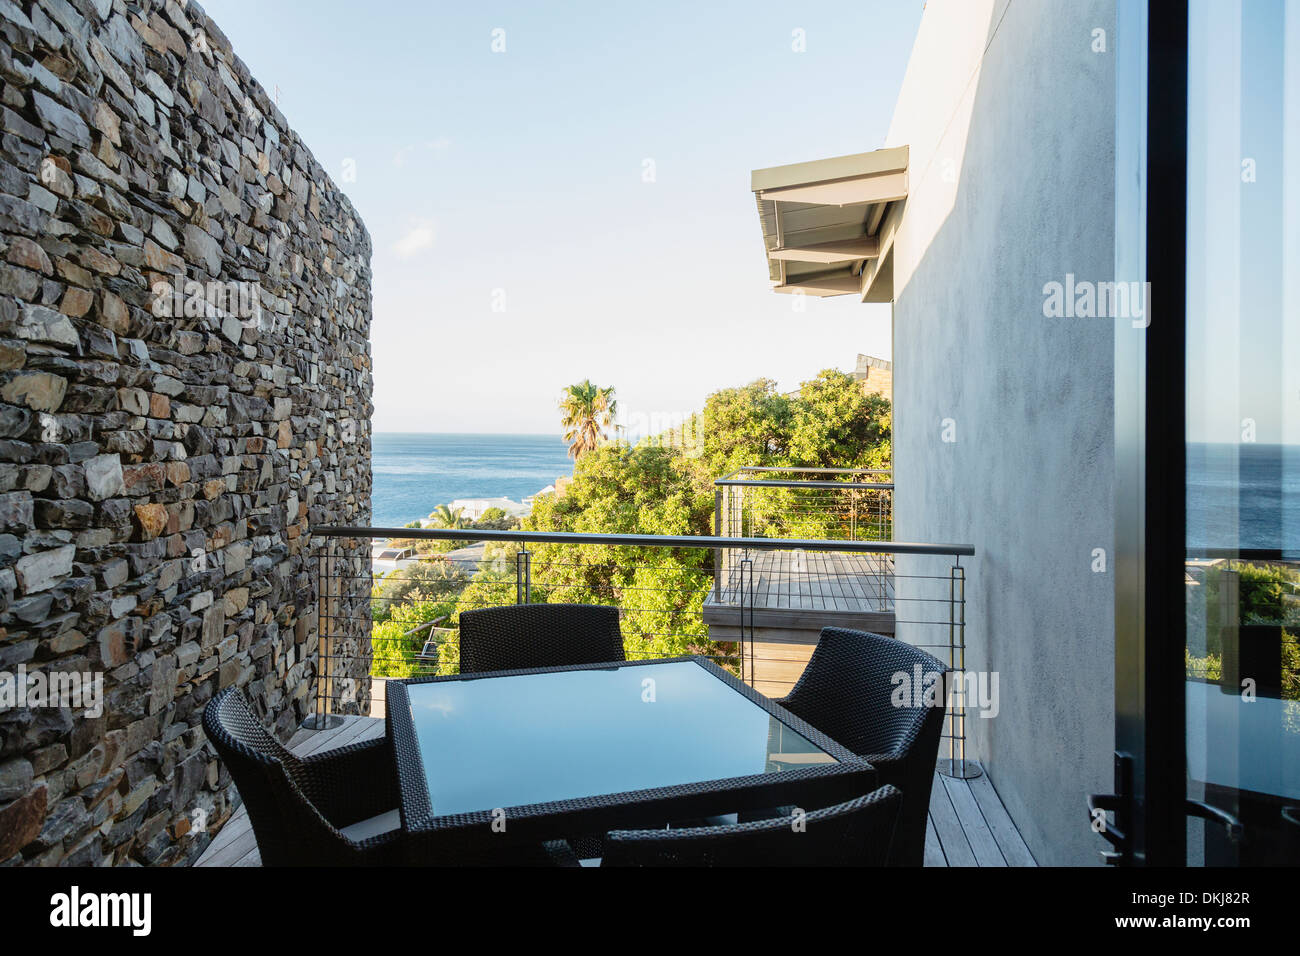 Table and chairs on luxury balcony overlooking ocean Stock Photo